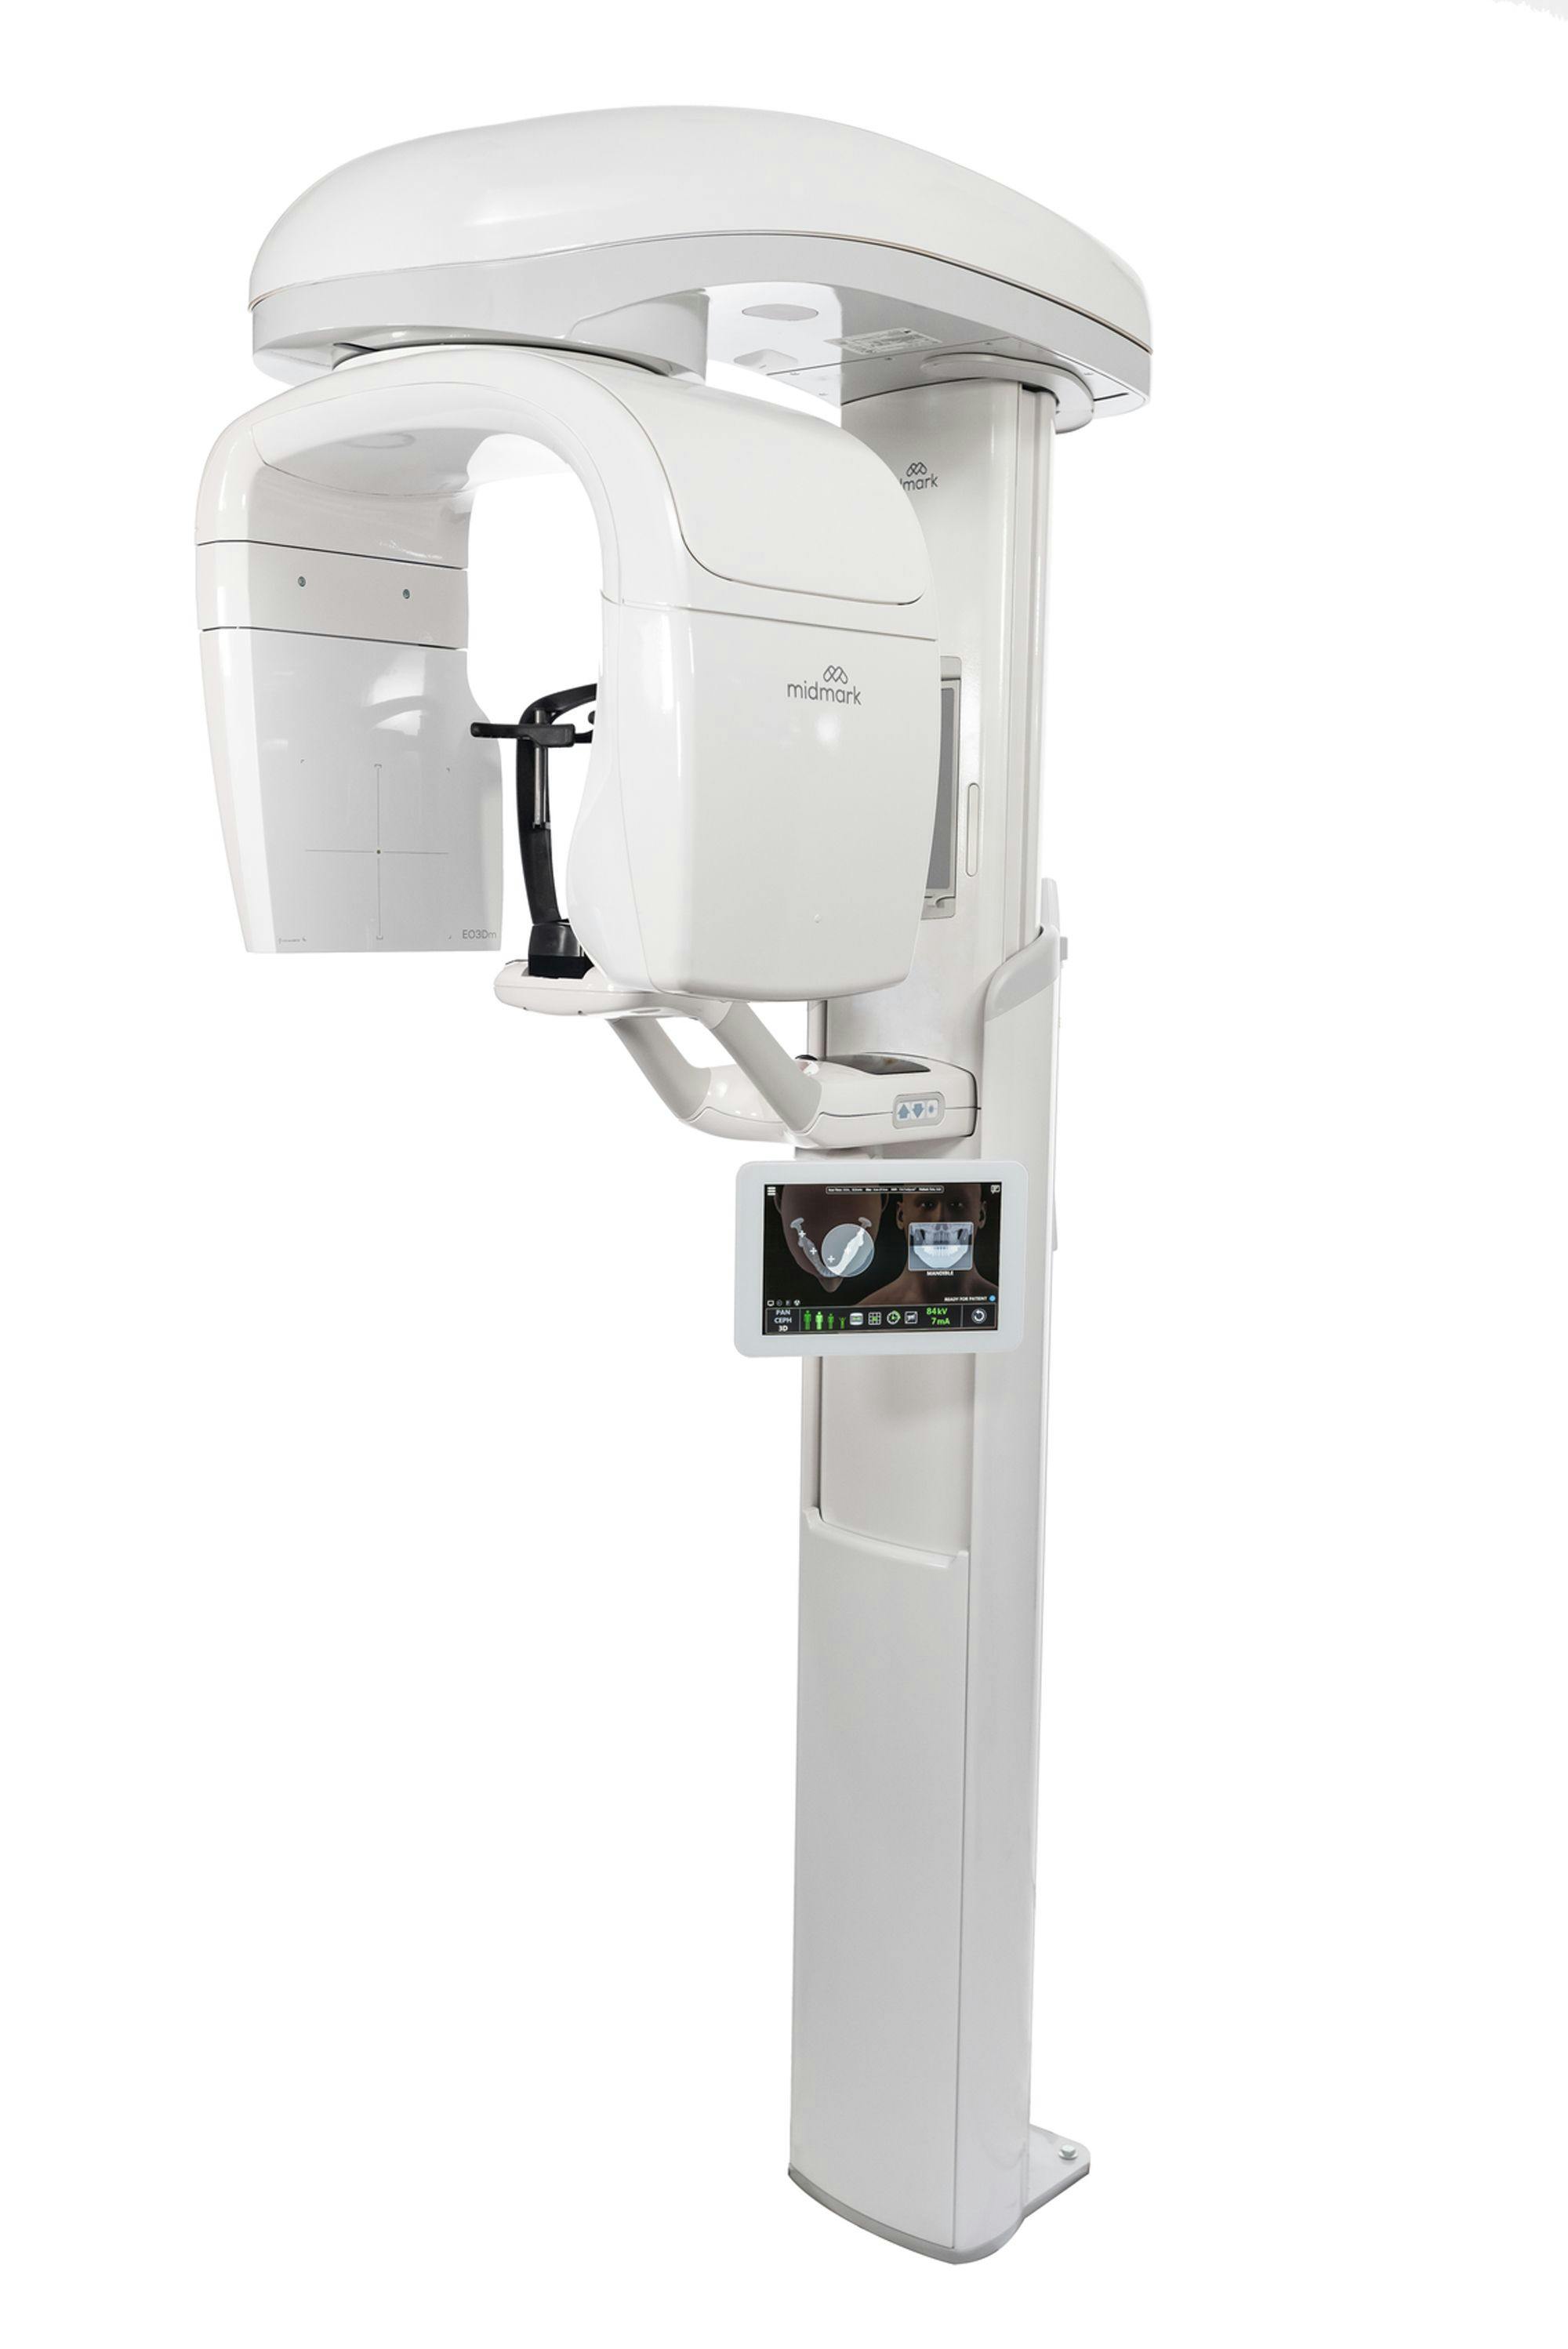 Midmark Releases New Midmark Extraoral Imaging System